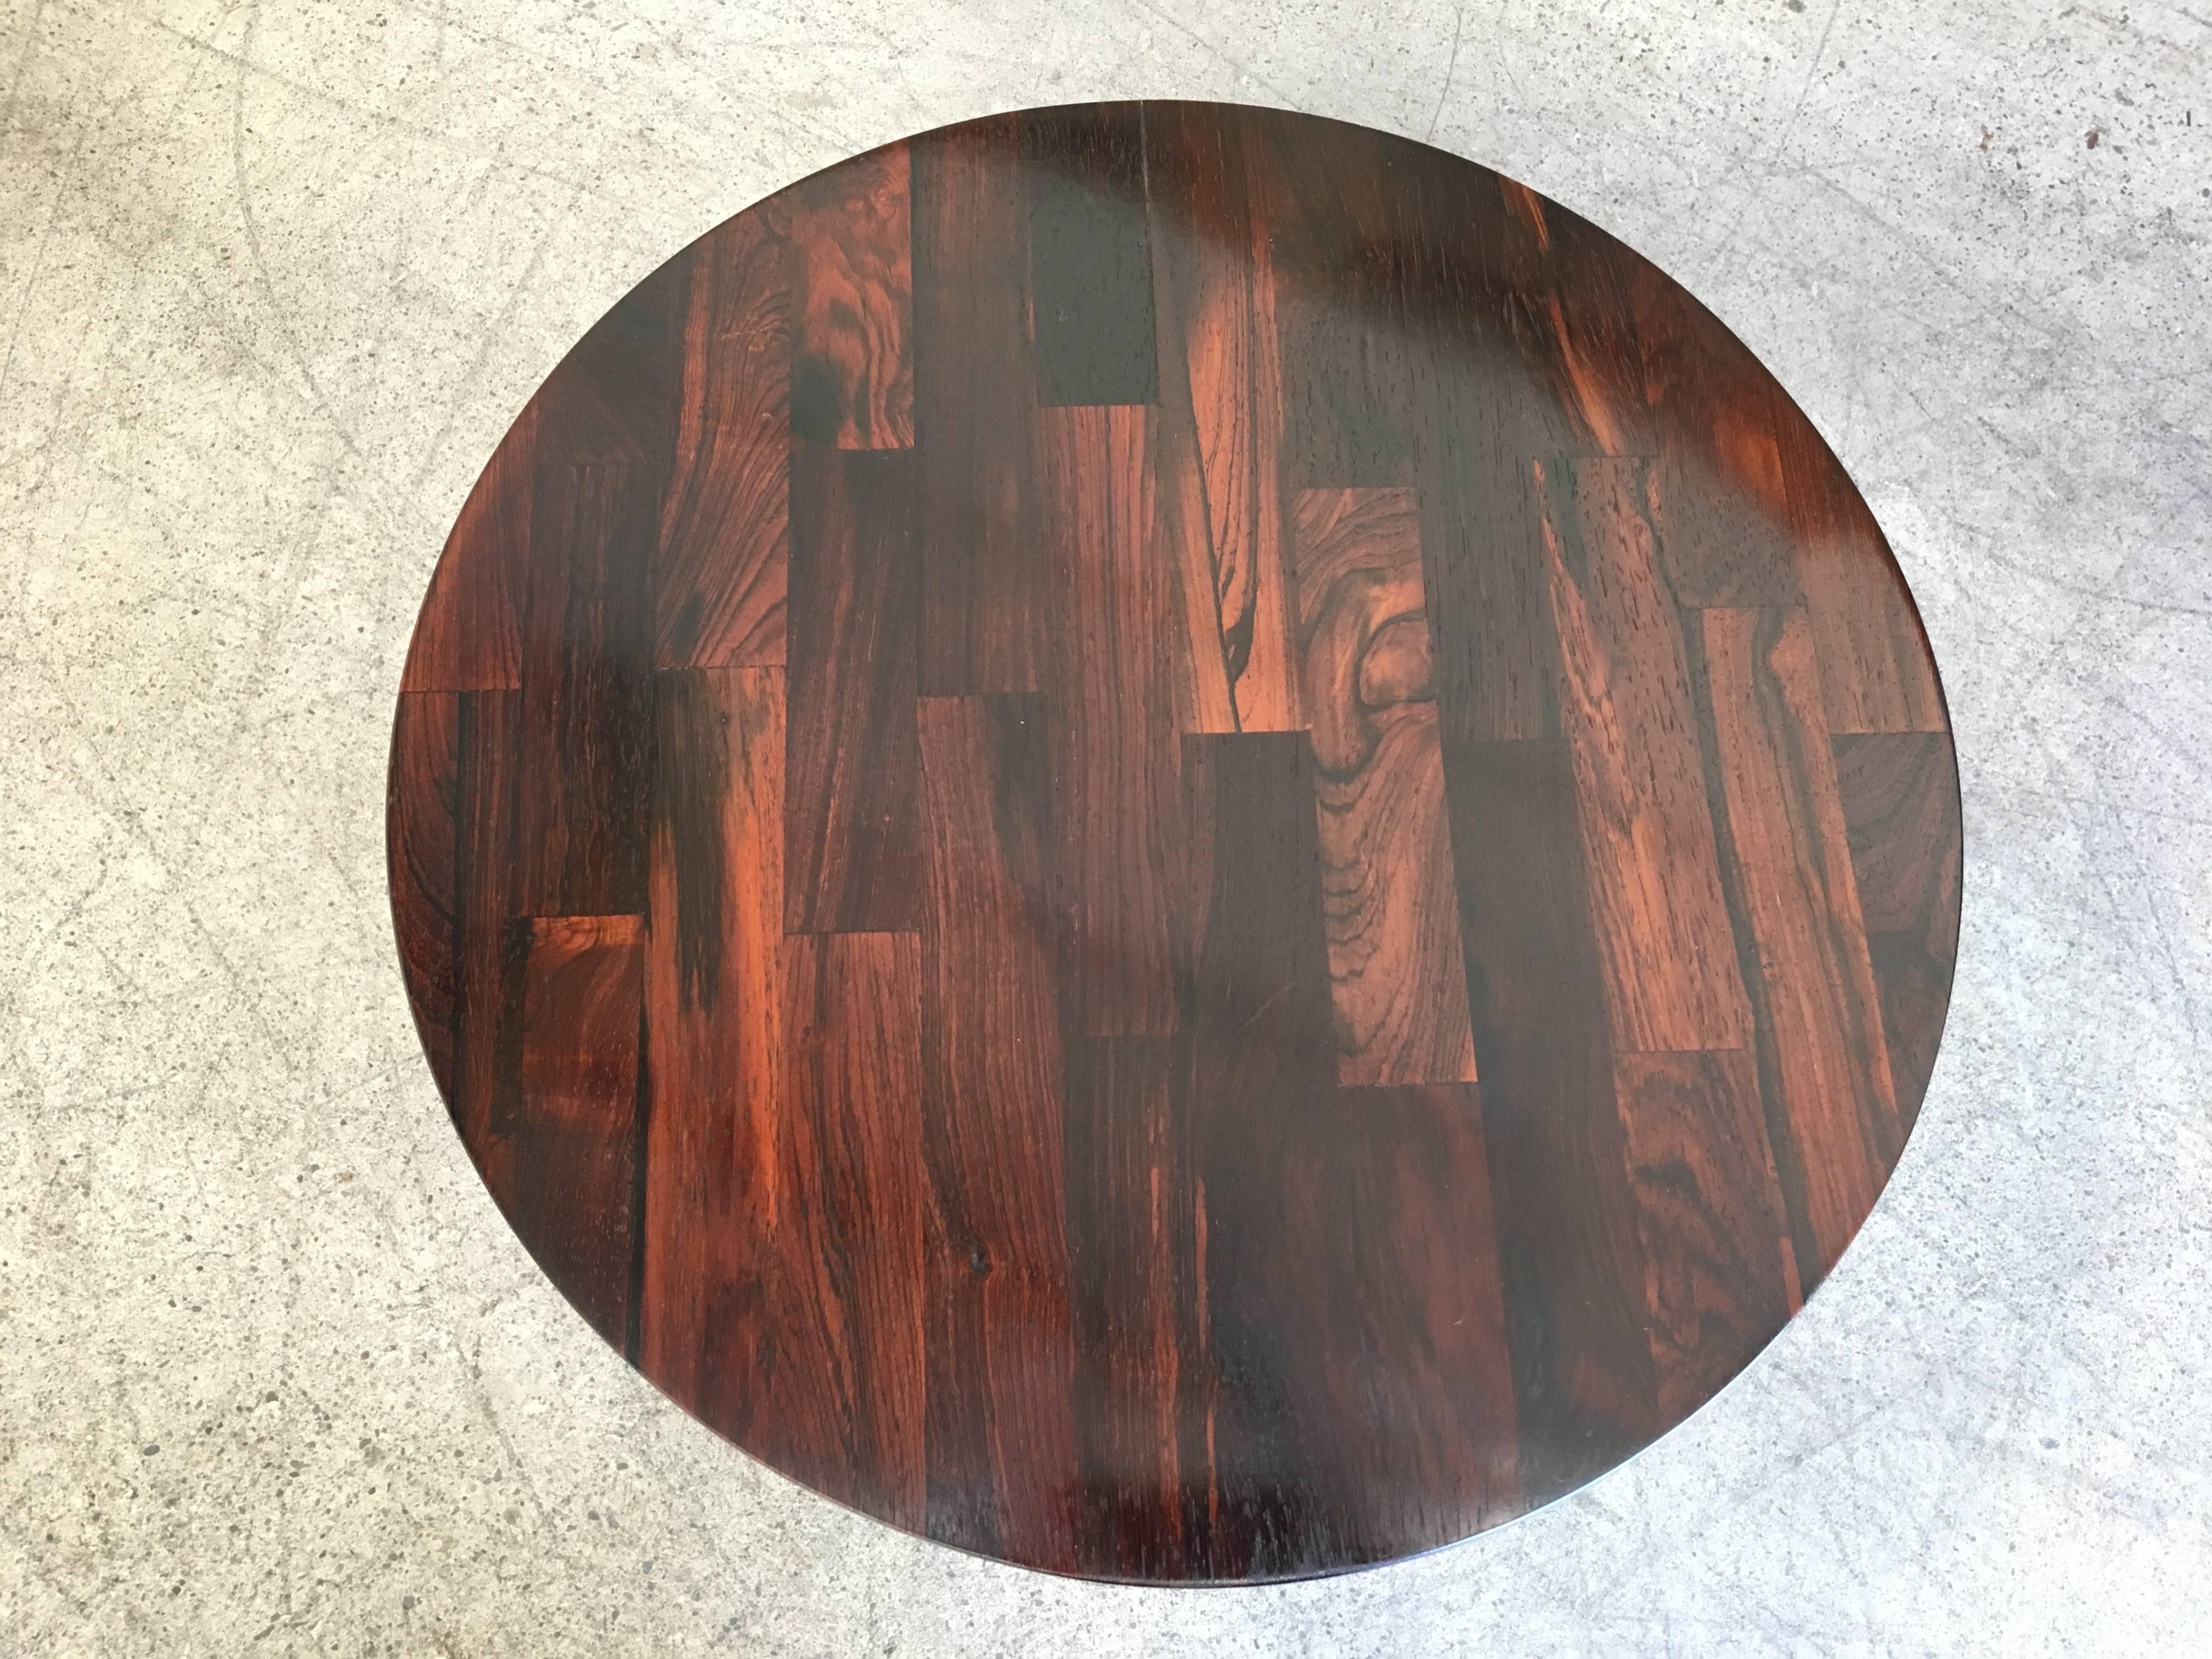 This is solid rosewood strips that were assembled into a round top for the chrome X-base.